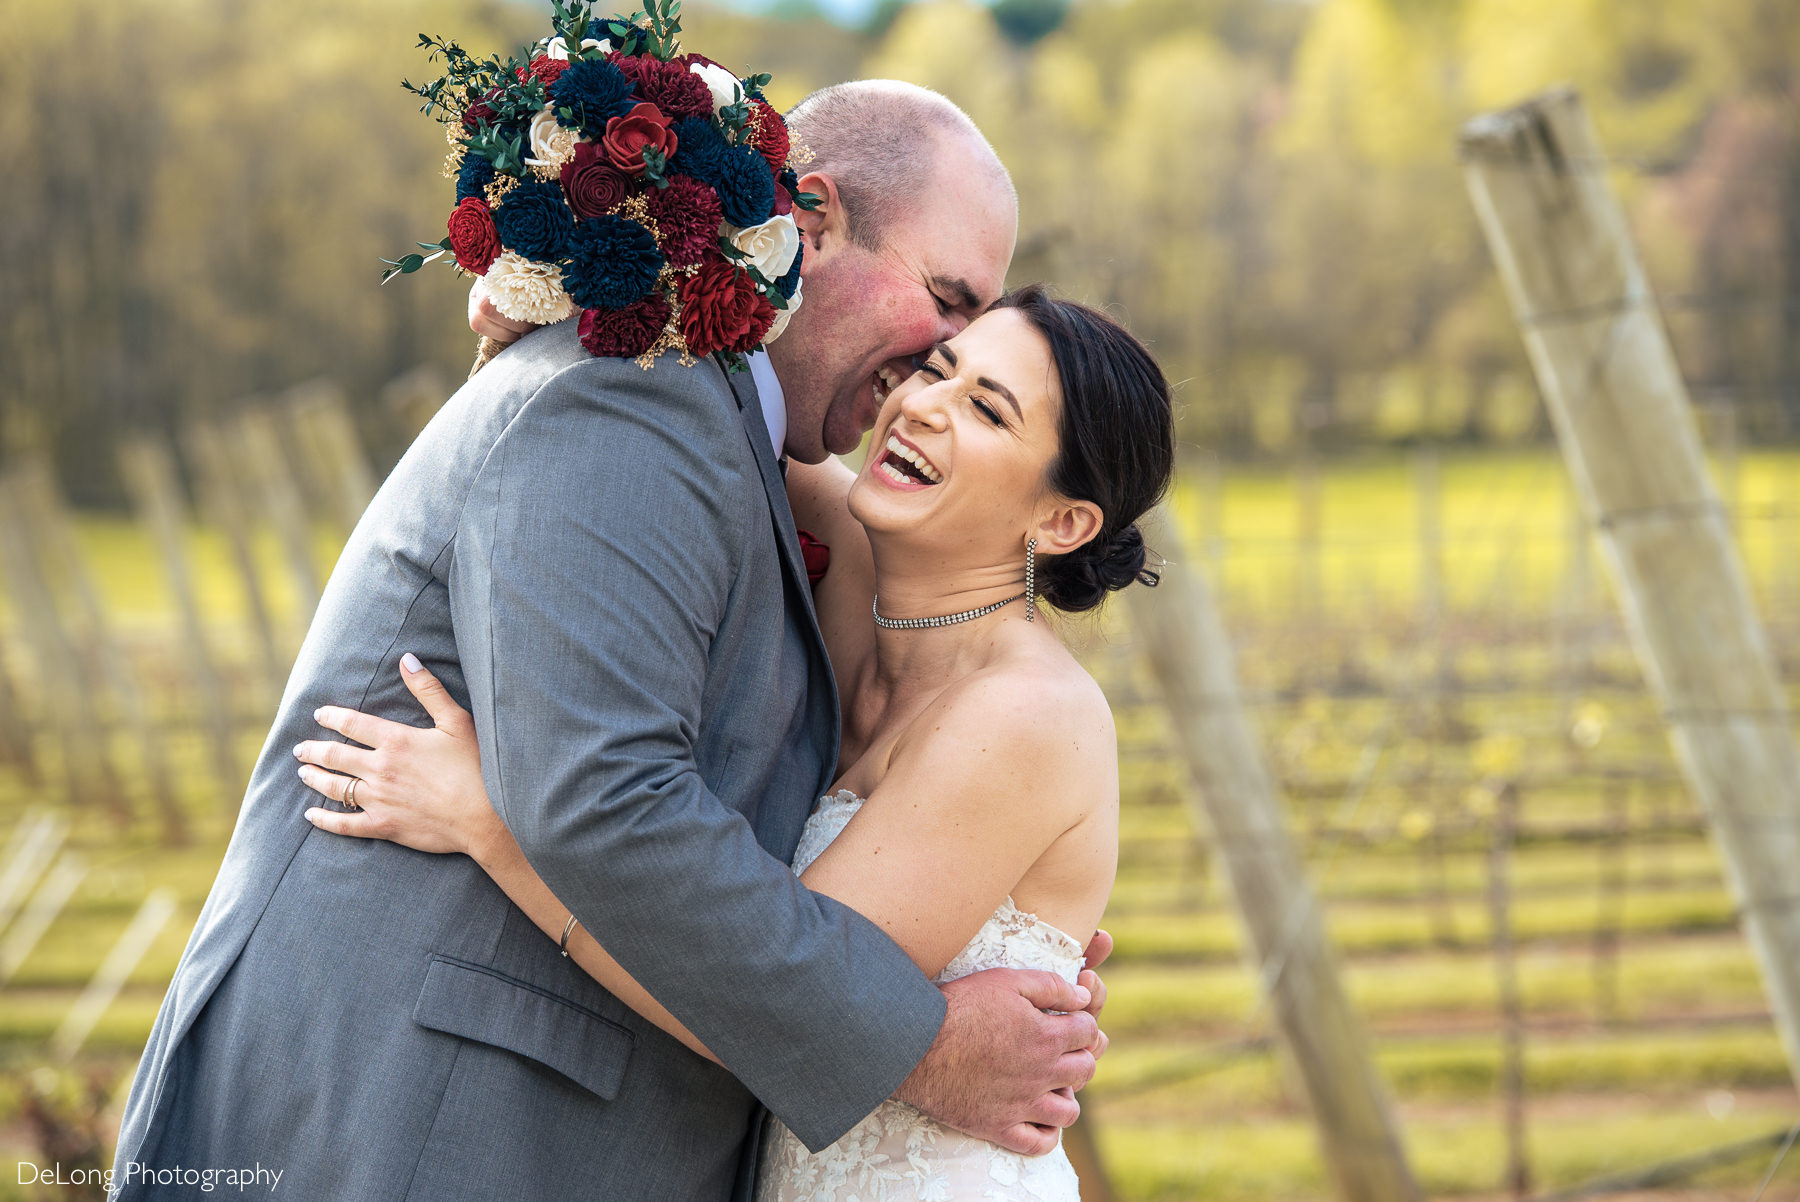 Bride and groom laughing with red, white, and navy bouquet over groom's shoulder during portraits at Childress Vineyards by Charlotte Wedding Photographers DeLong Photography